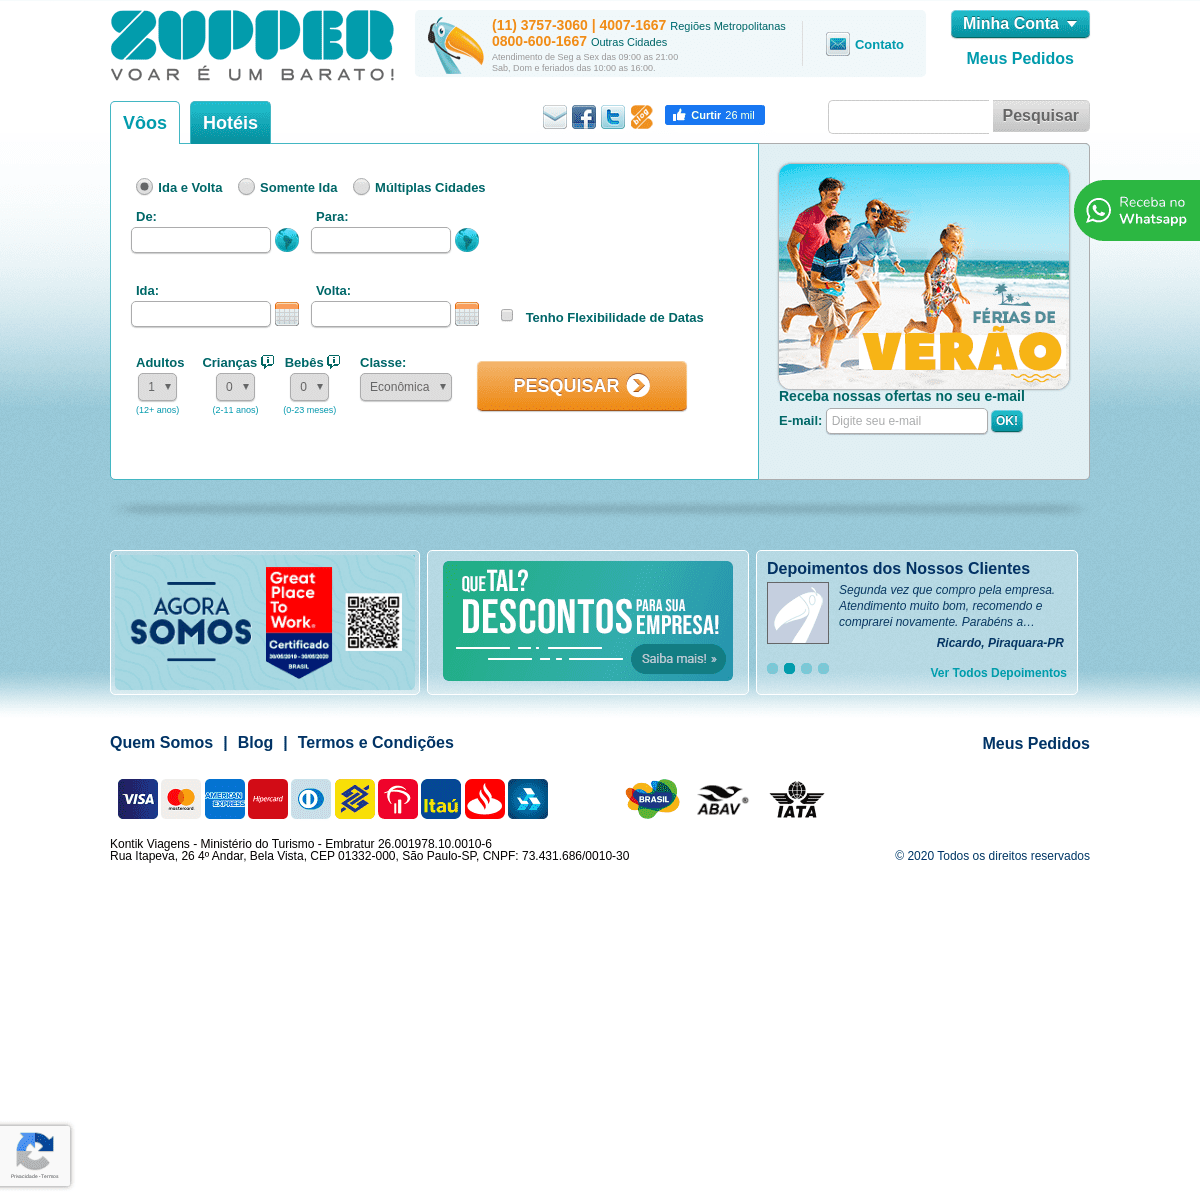 A complete backup of zupper.com.br